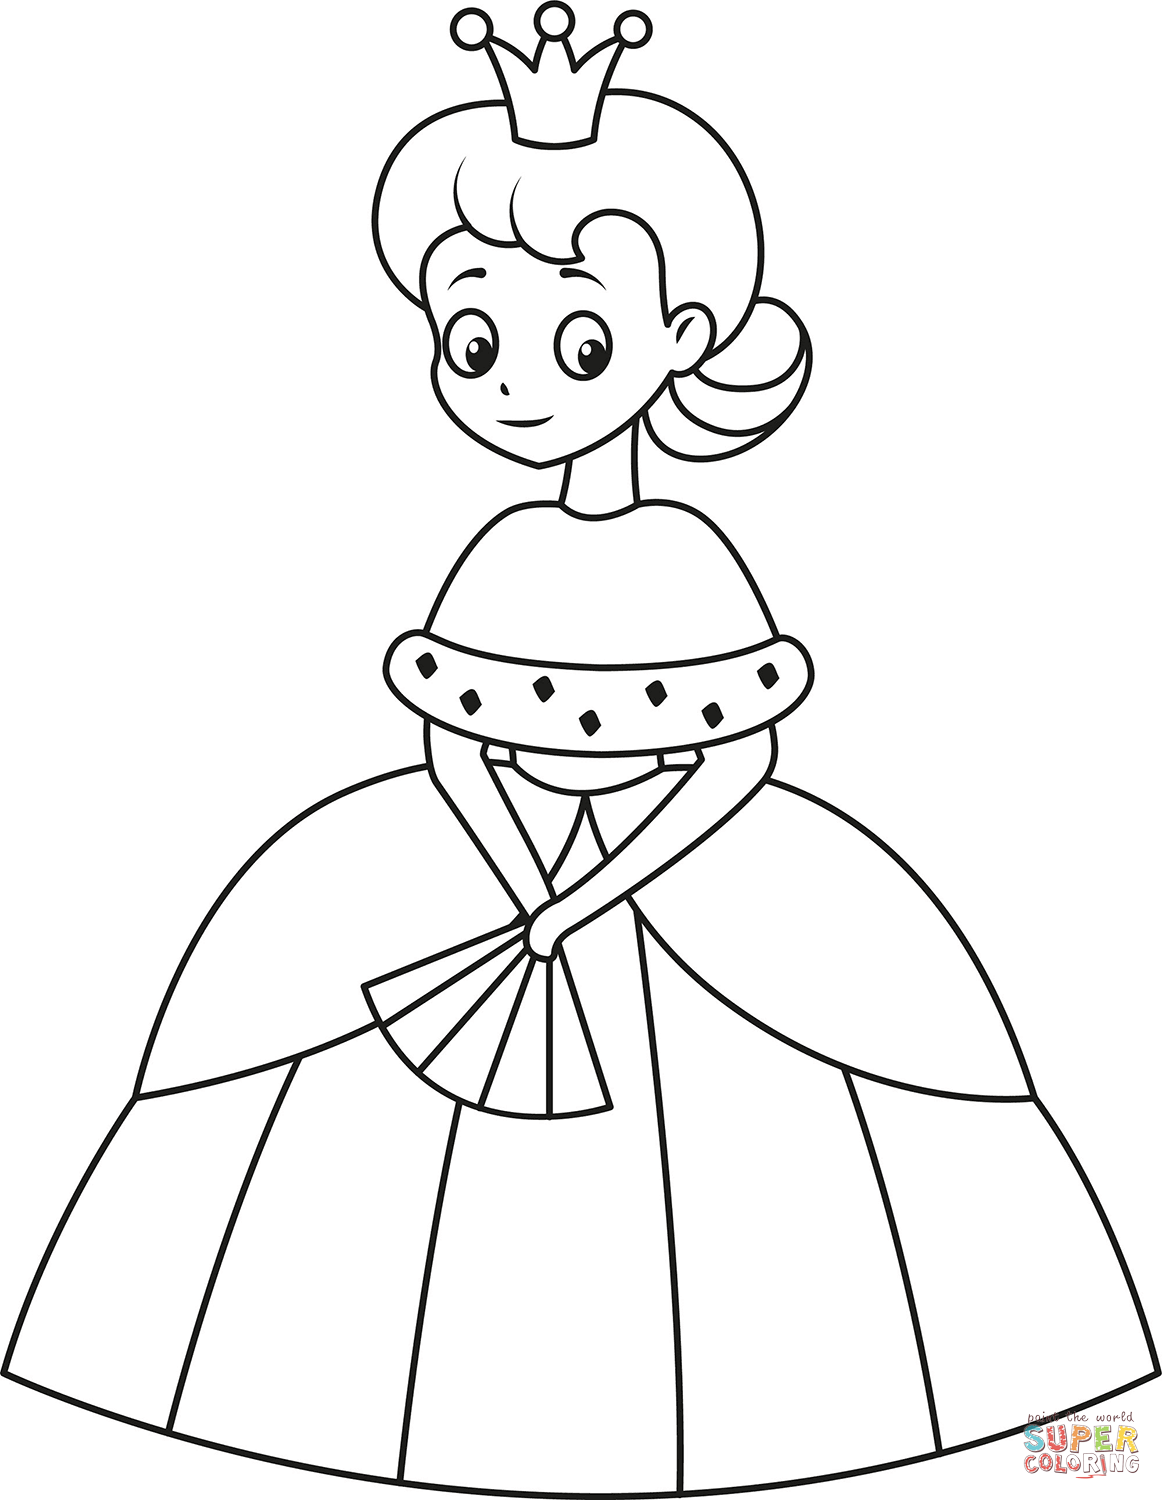 Cartoon queen coloring page free printable coloring pages